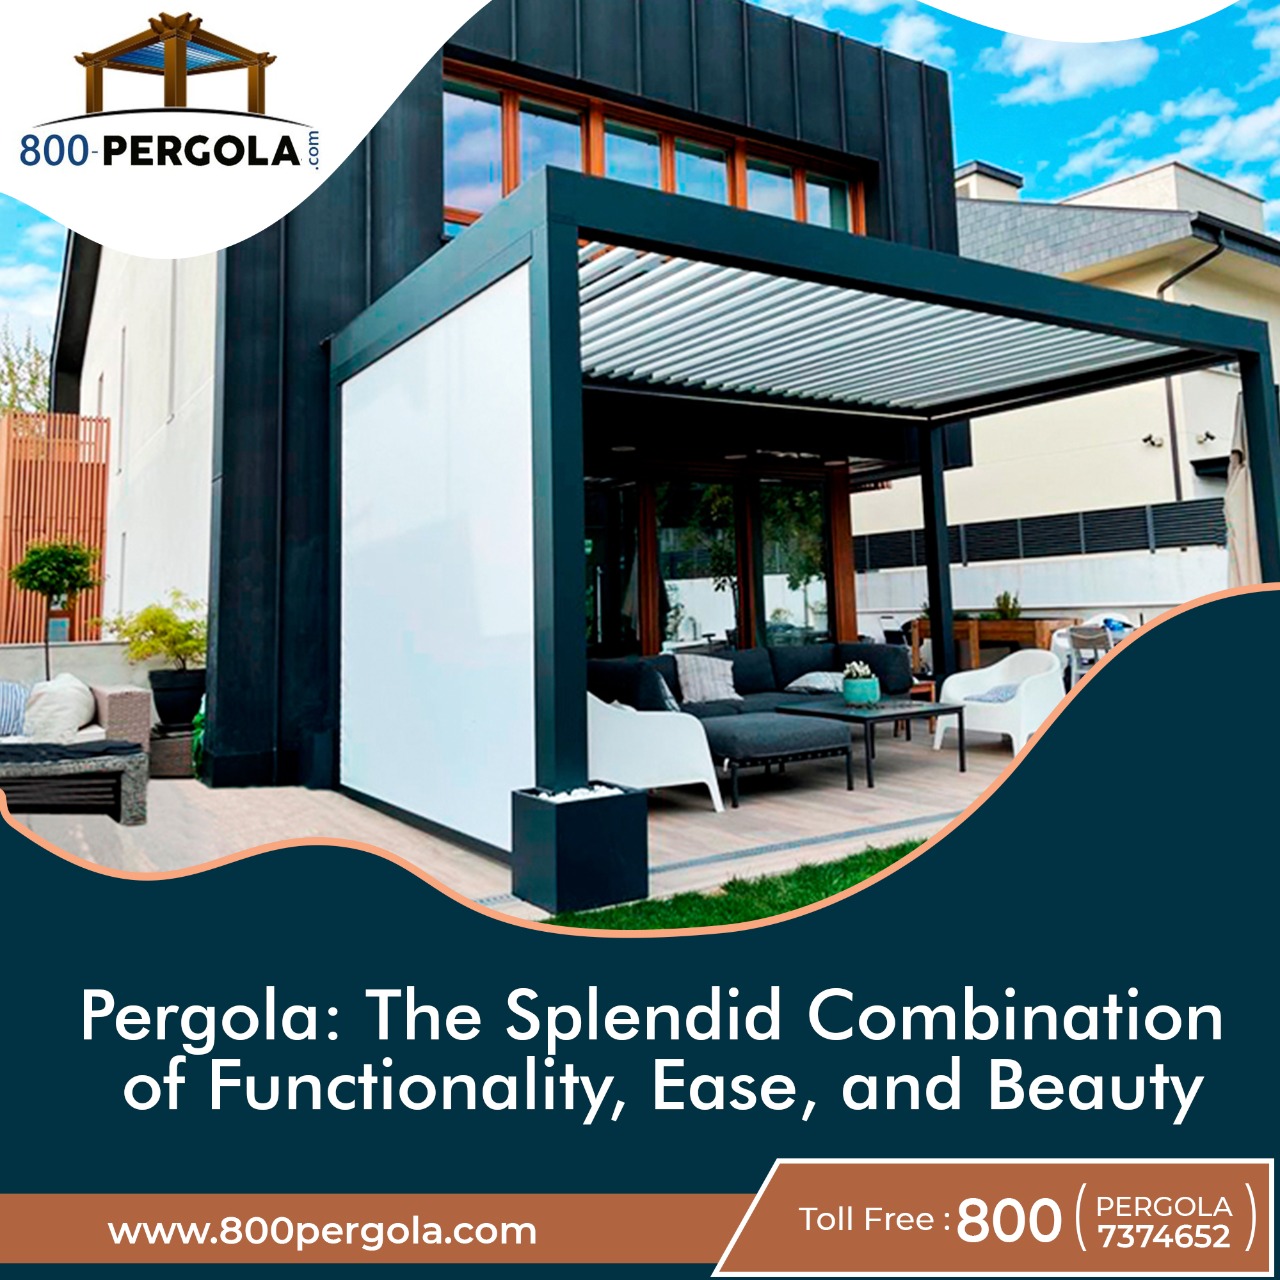 Pergola: The Splendid Combination of Functionality, Ease, and Beauty